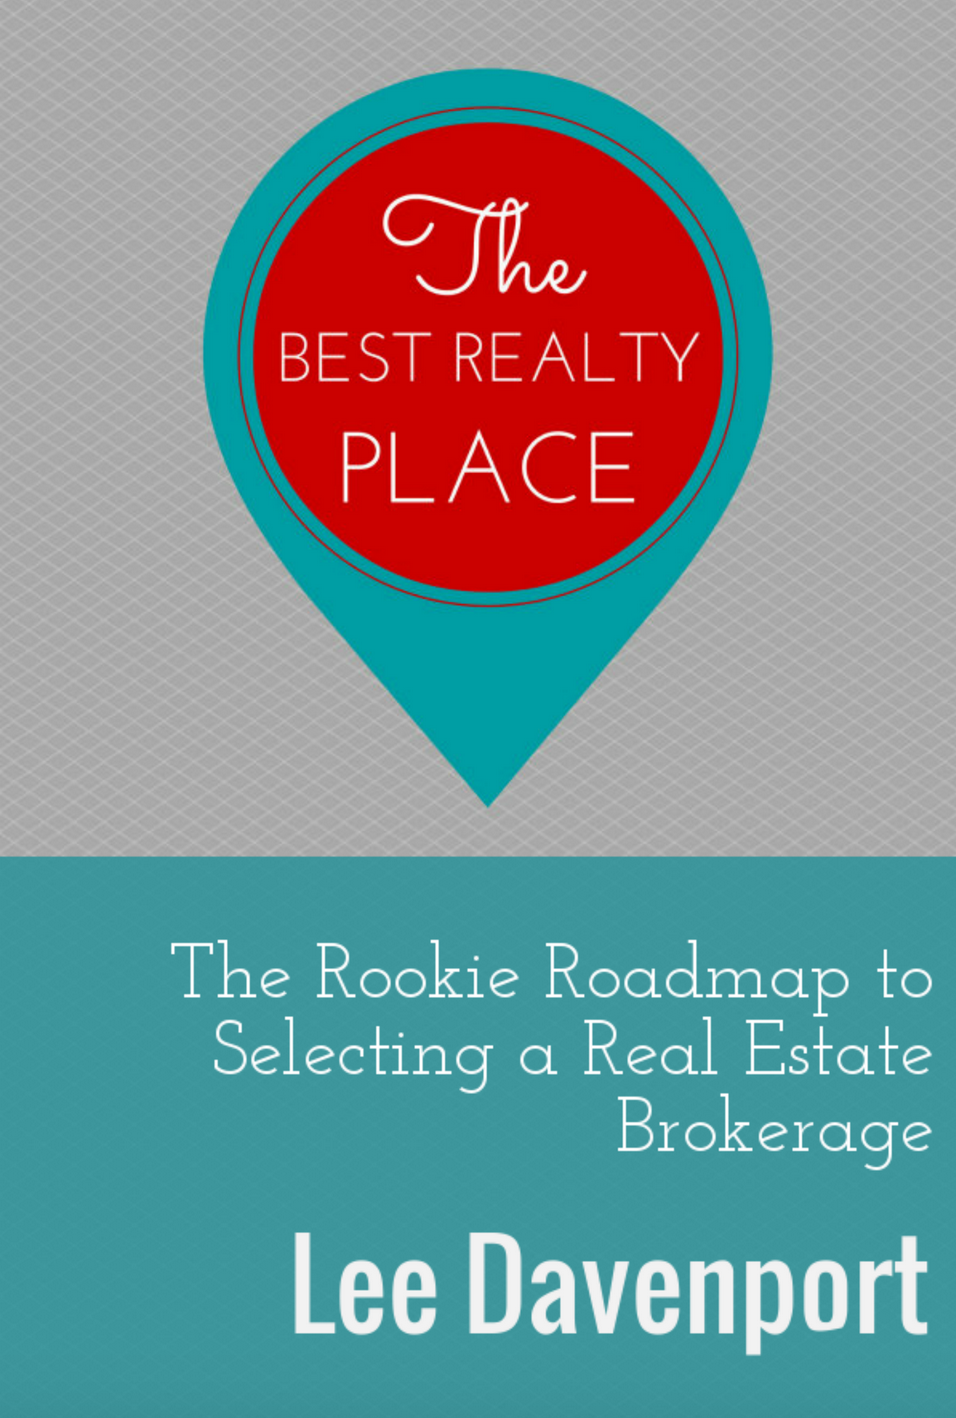 The Rookie Roadmap to Selecting a Real Estate Brokerage